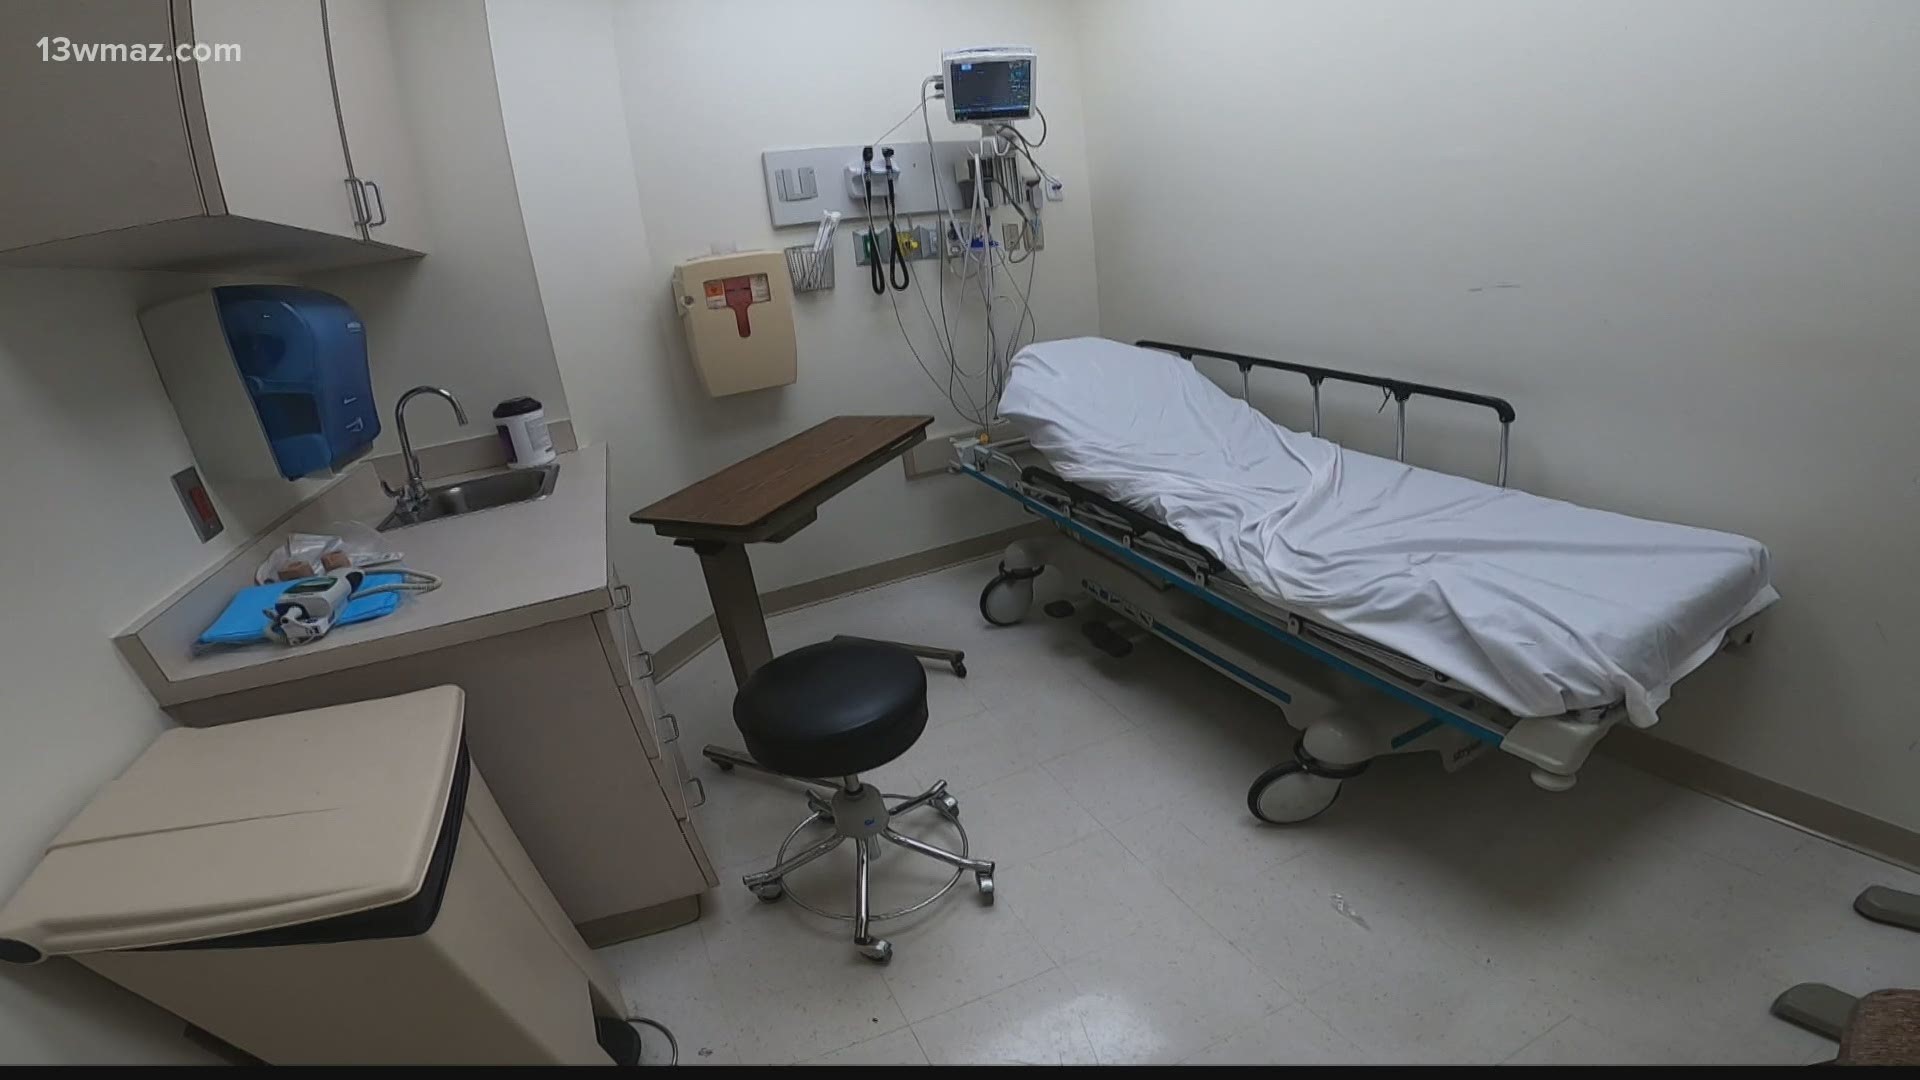 Hospitals nationwide are experiencing longer wait times in emergency rooms, and health experts say it's for a number of reasons.